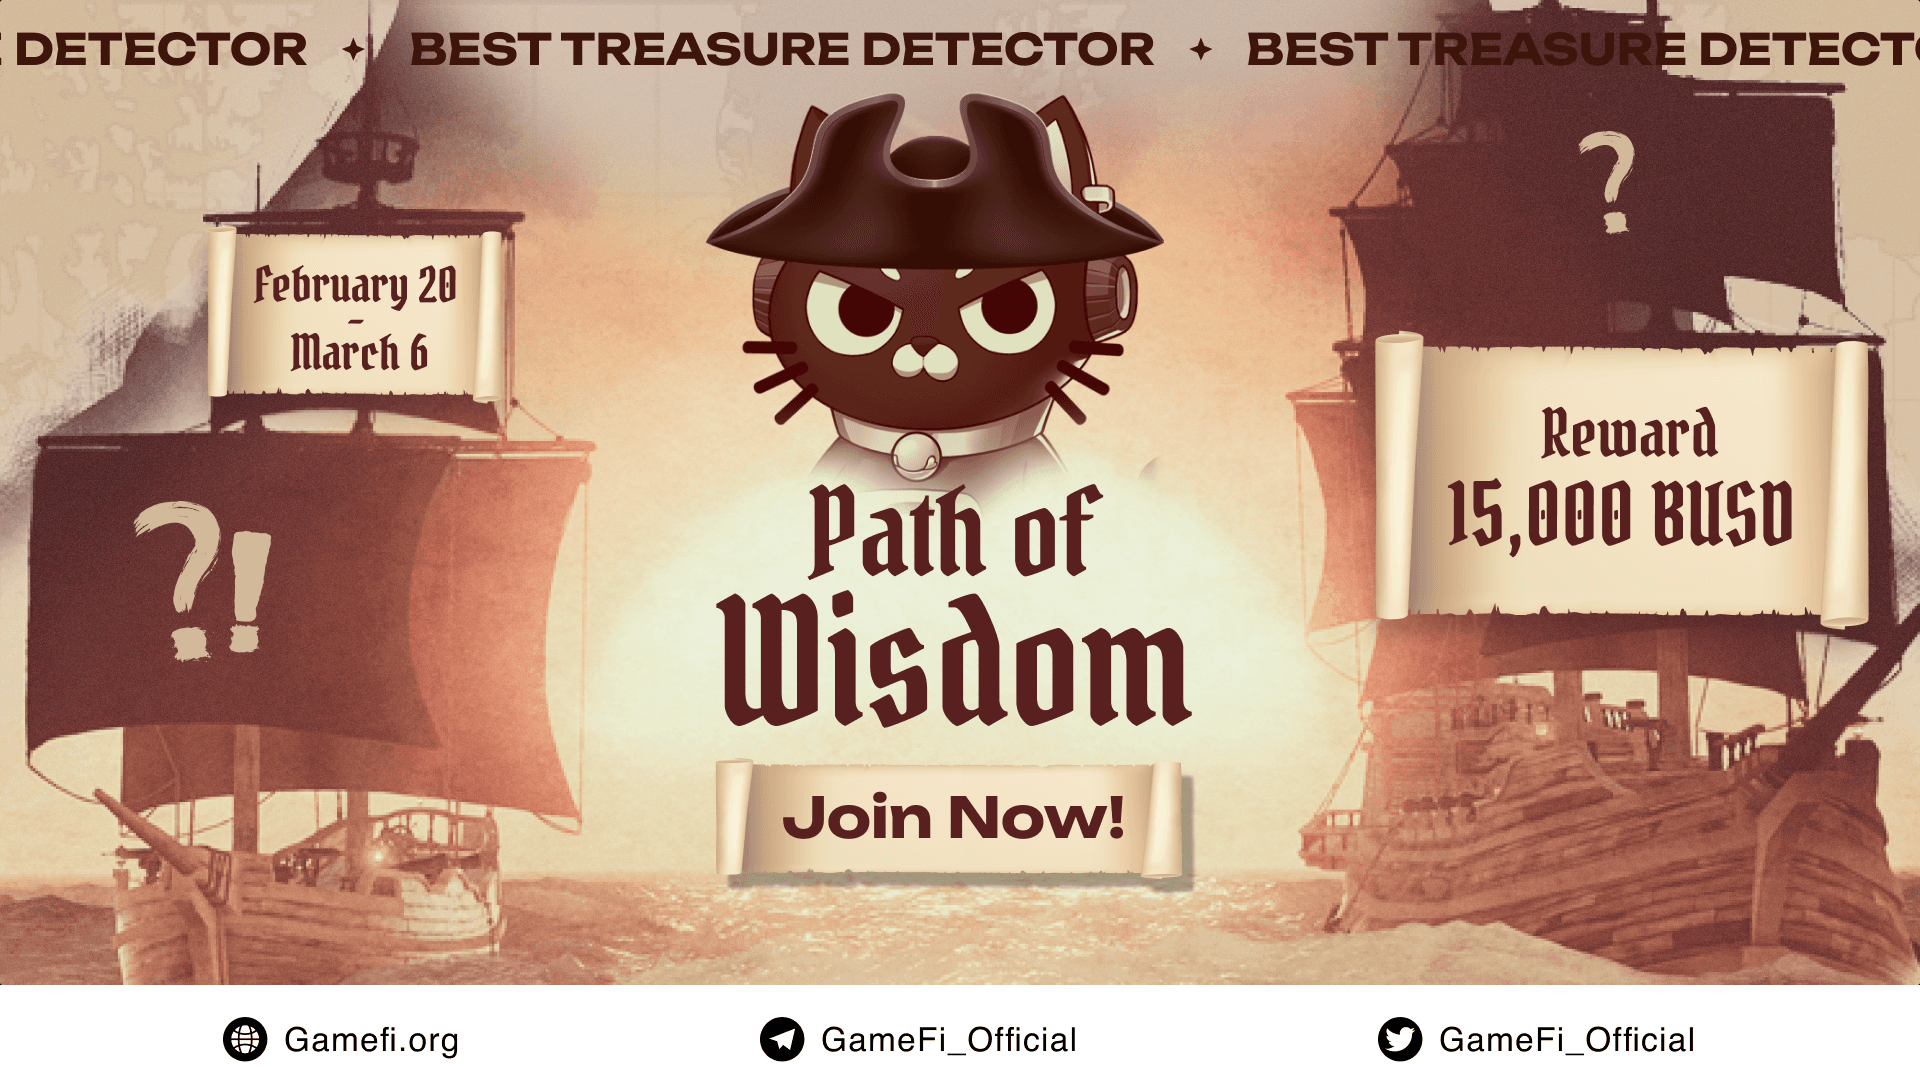 PATH OF WISDOM: $15,000 Hunt For Knowledge Treasures On Game Hub! 🧭